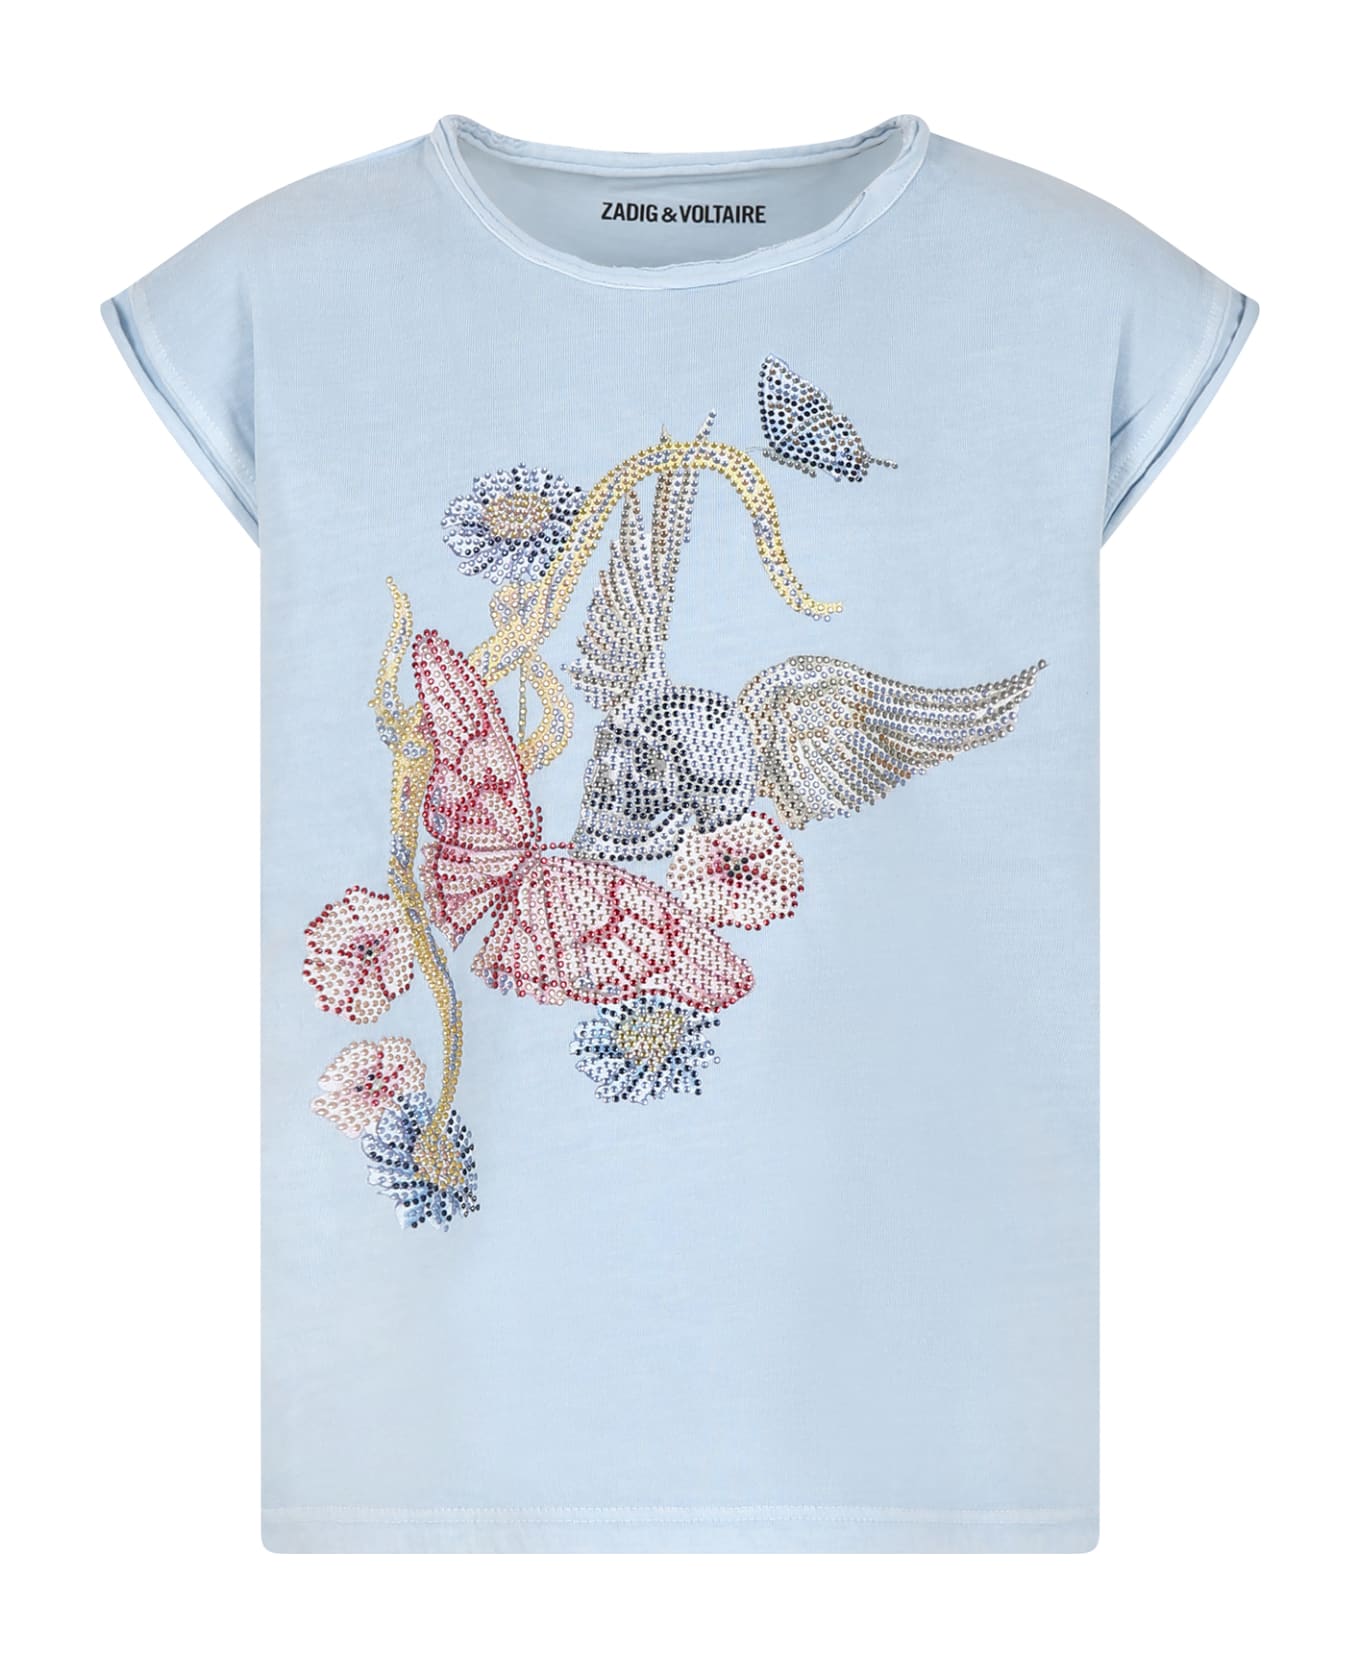 Zadig & Voltaire Light Blue T-shirt For Girl With Skull And Butterfly - Light Blue